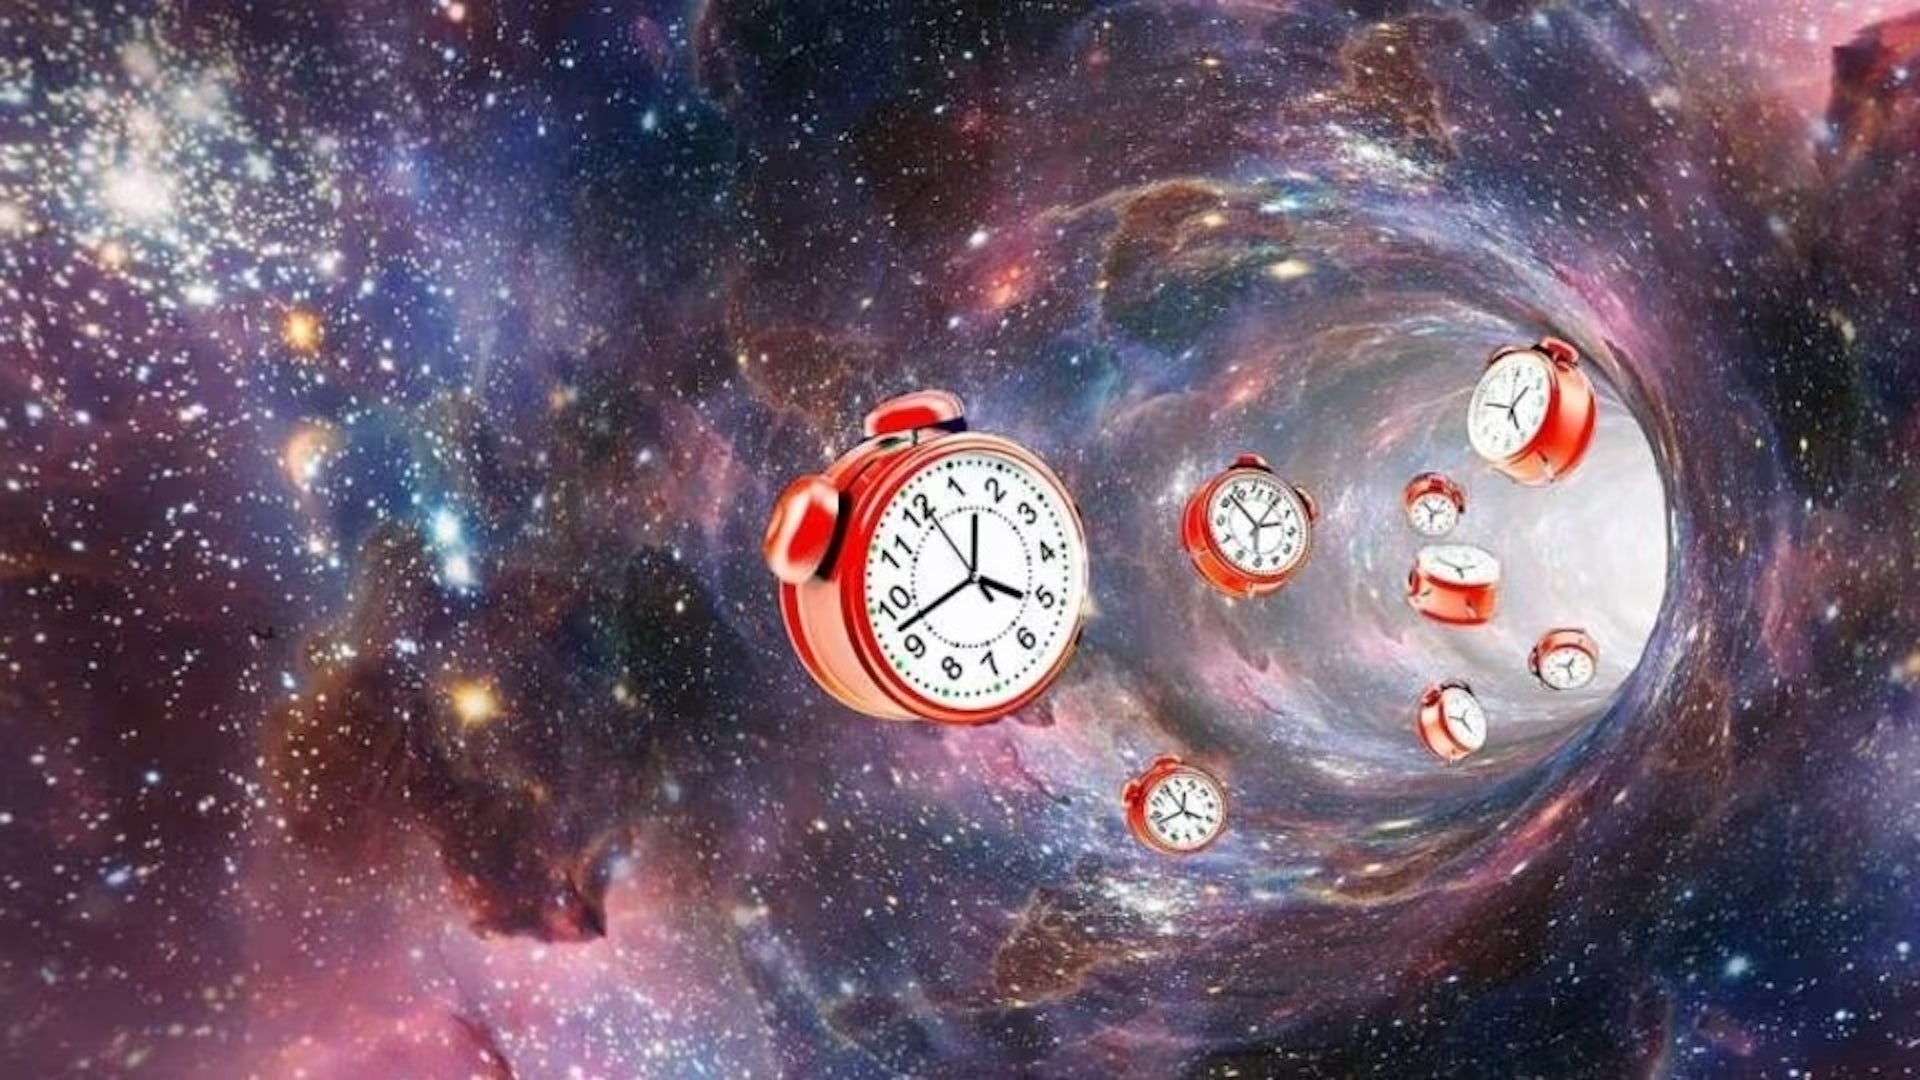 a swirling galaxy image overlaid with classic red alarm clocks with bells in a spiral pattern